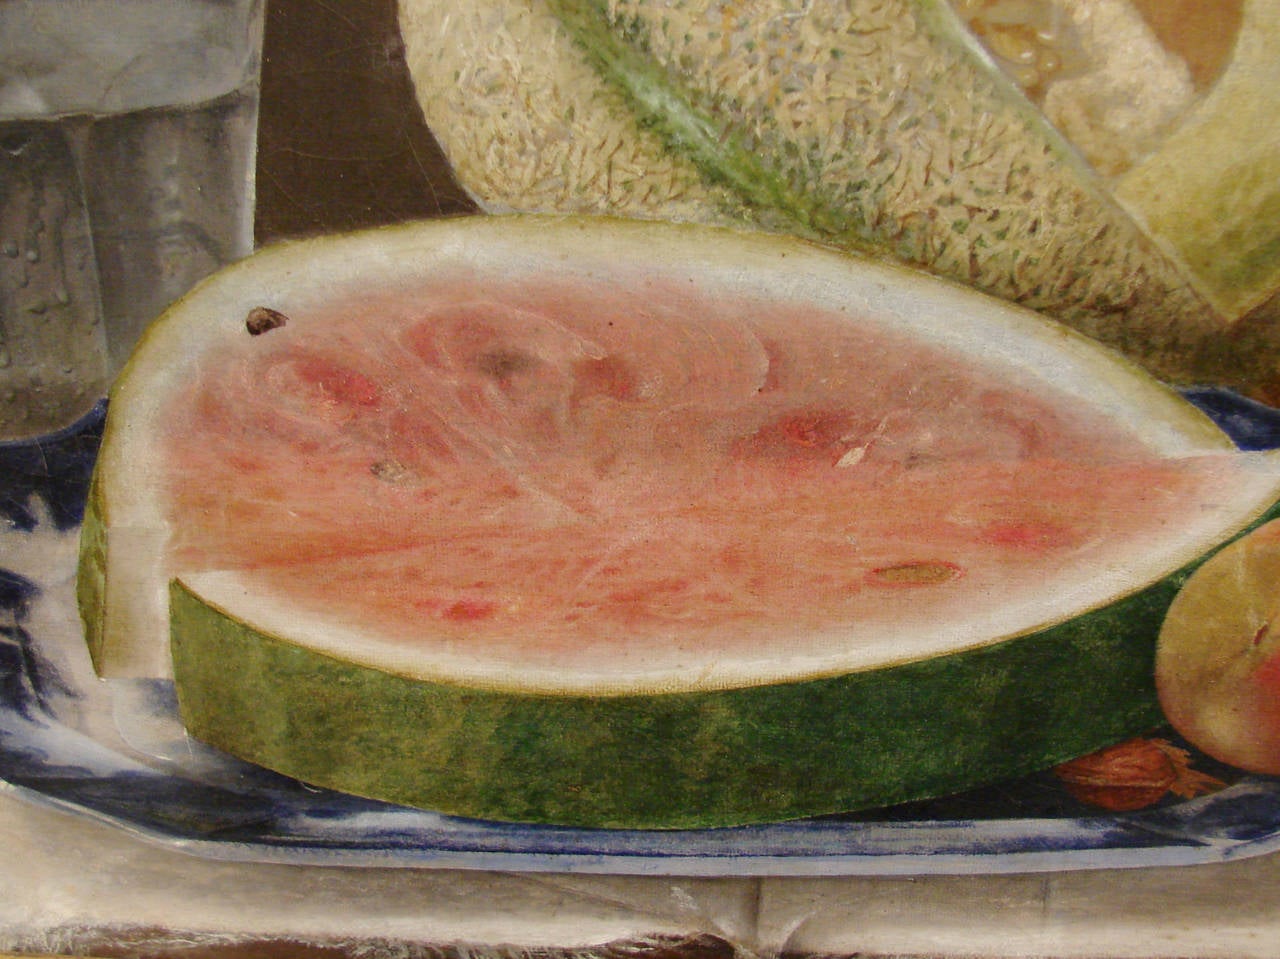 Victorian American Still Life Oil on Canvas with Watermelon, Cantelope and Peaches